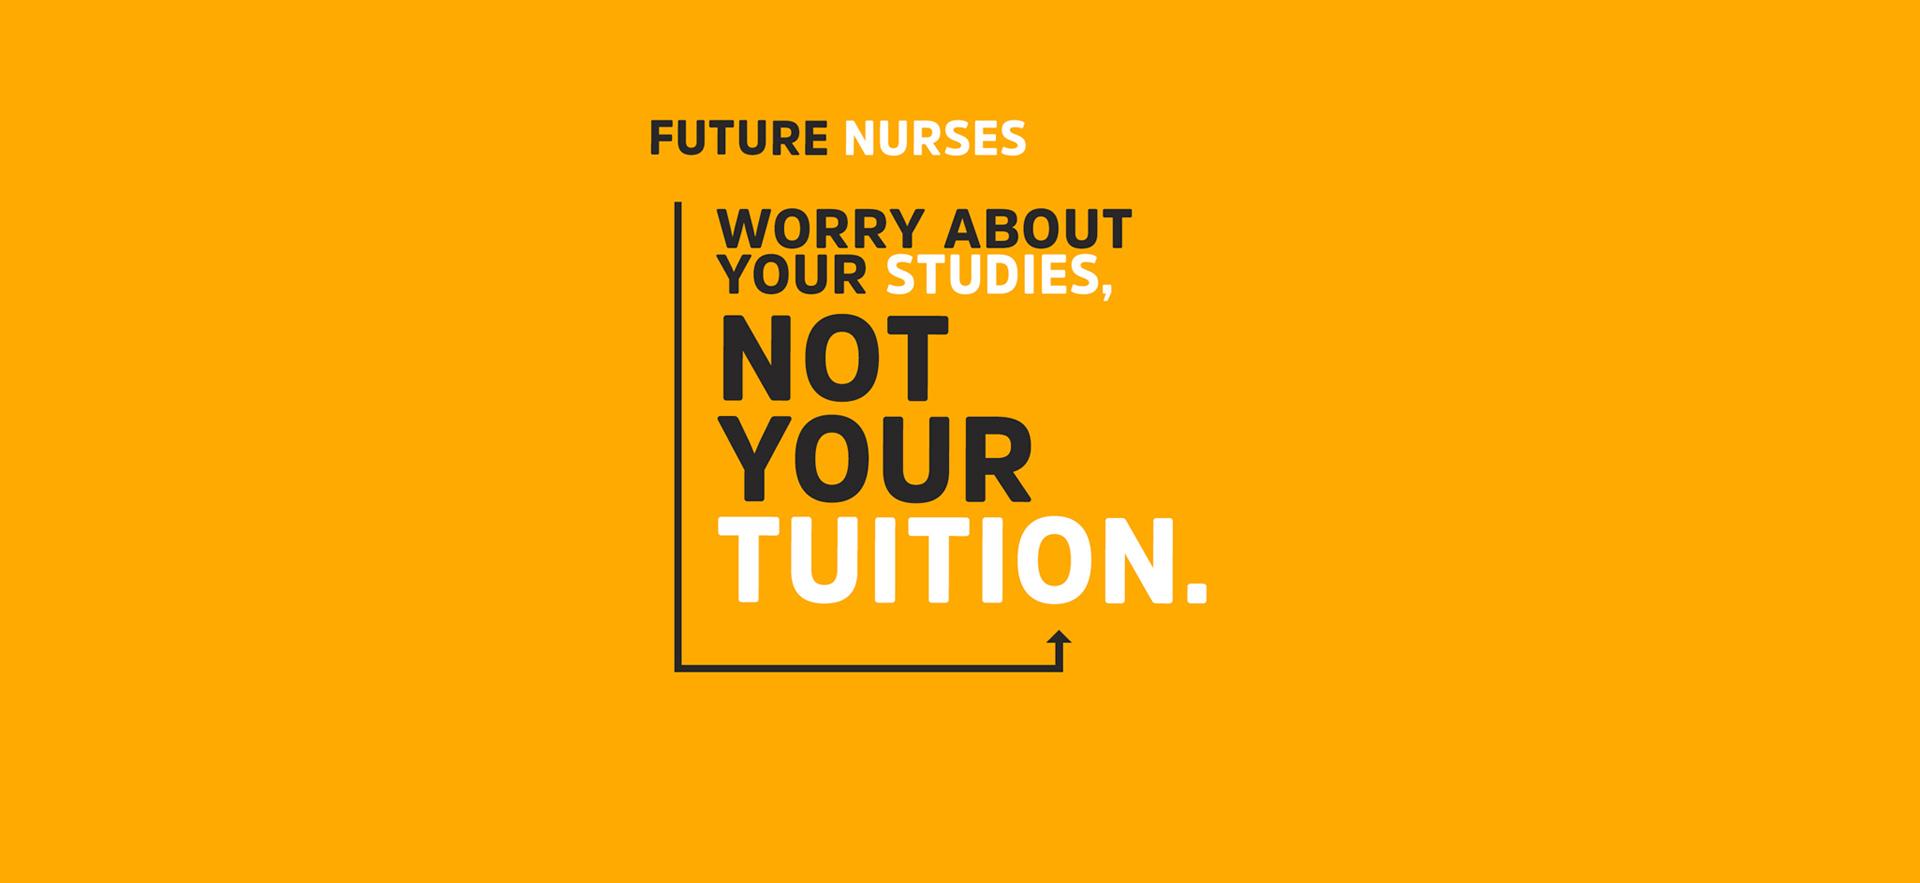 yellow background with text "Future Nurses worry about your studies, not your tuition." about the Ontario Learn and Stay Grant